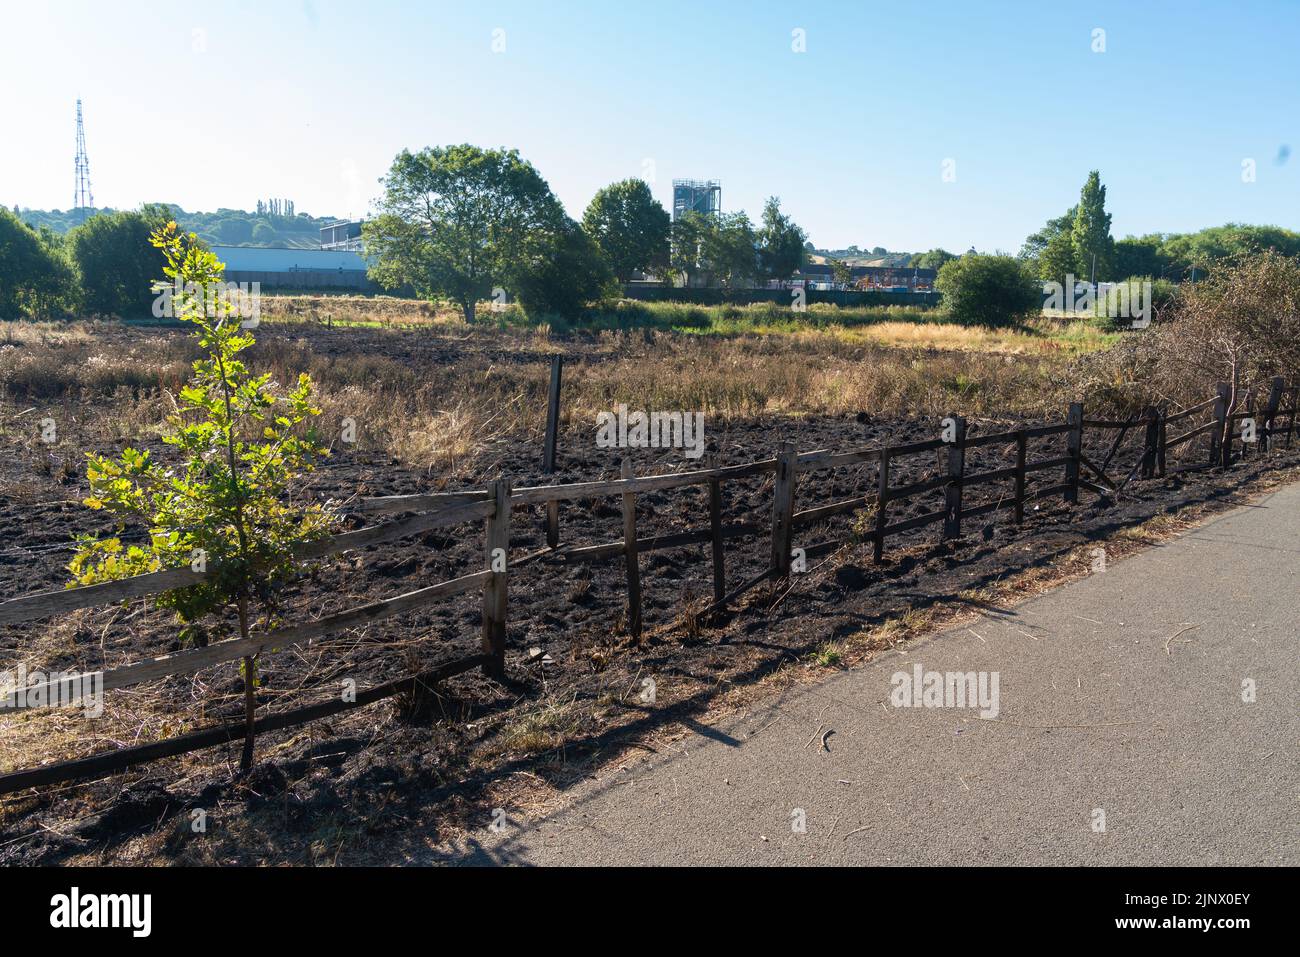 Scorched earth, summer grass-land fires, wildland fires, Increasing temperatures, hot, dry weather, grass, wildfires, urban, rural areas, no rainfall. Stock Photo